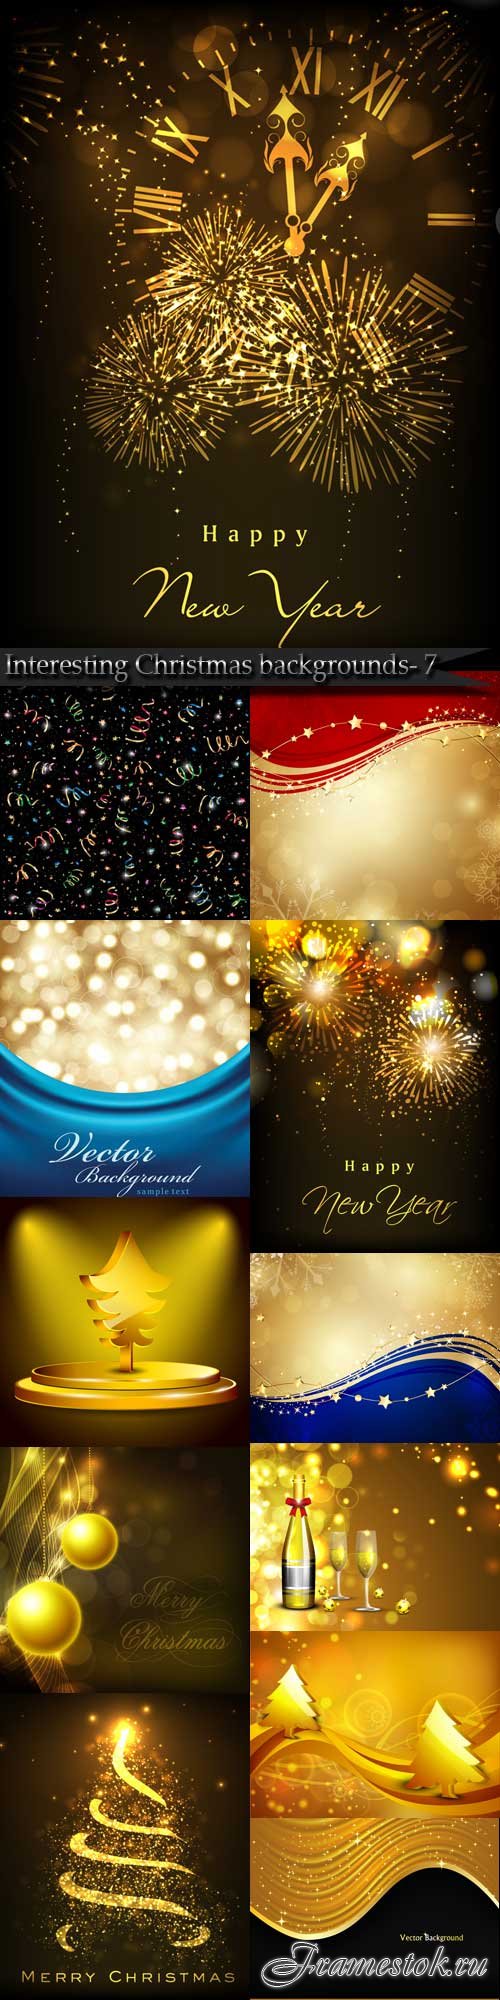 Interesting Christmas vector backgrounds- 7